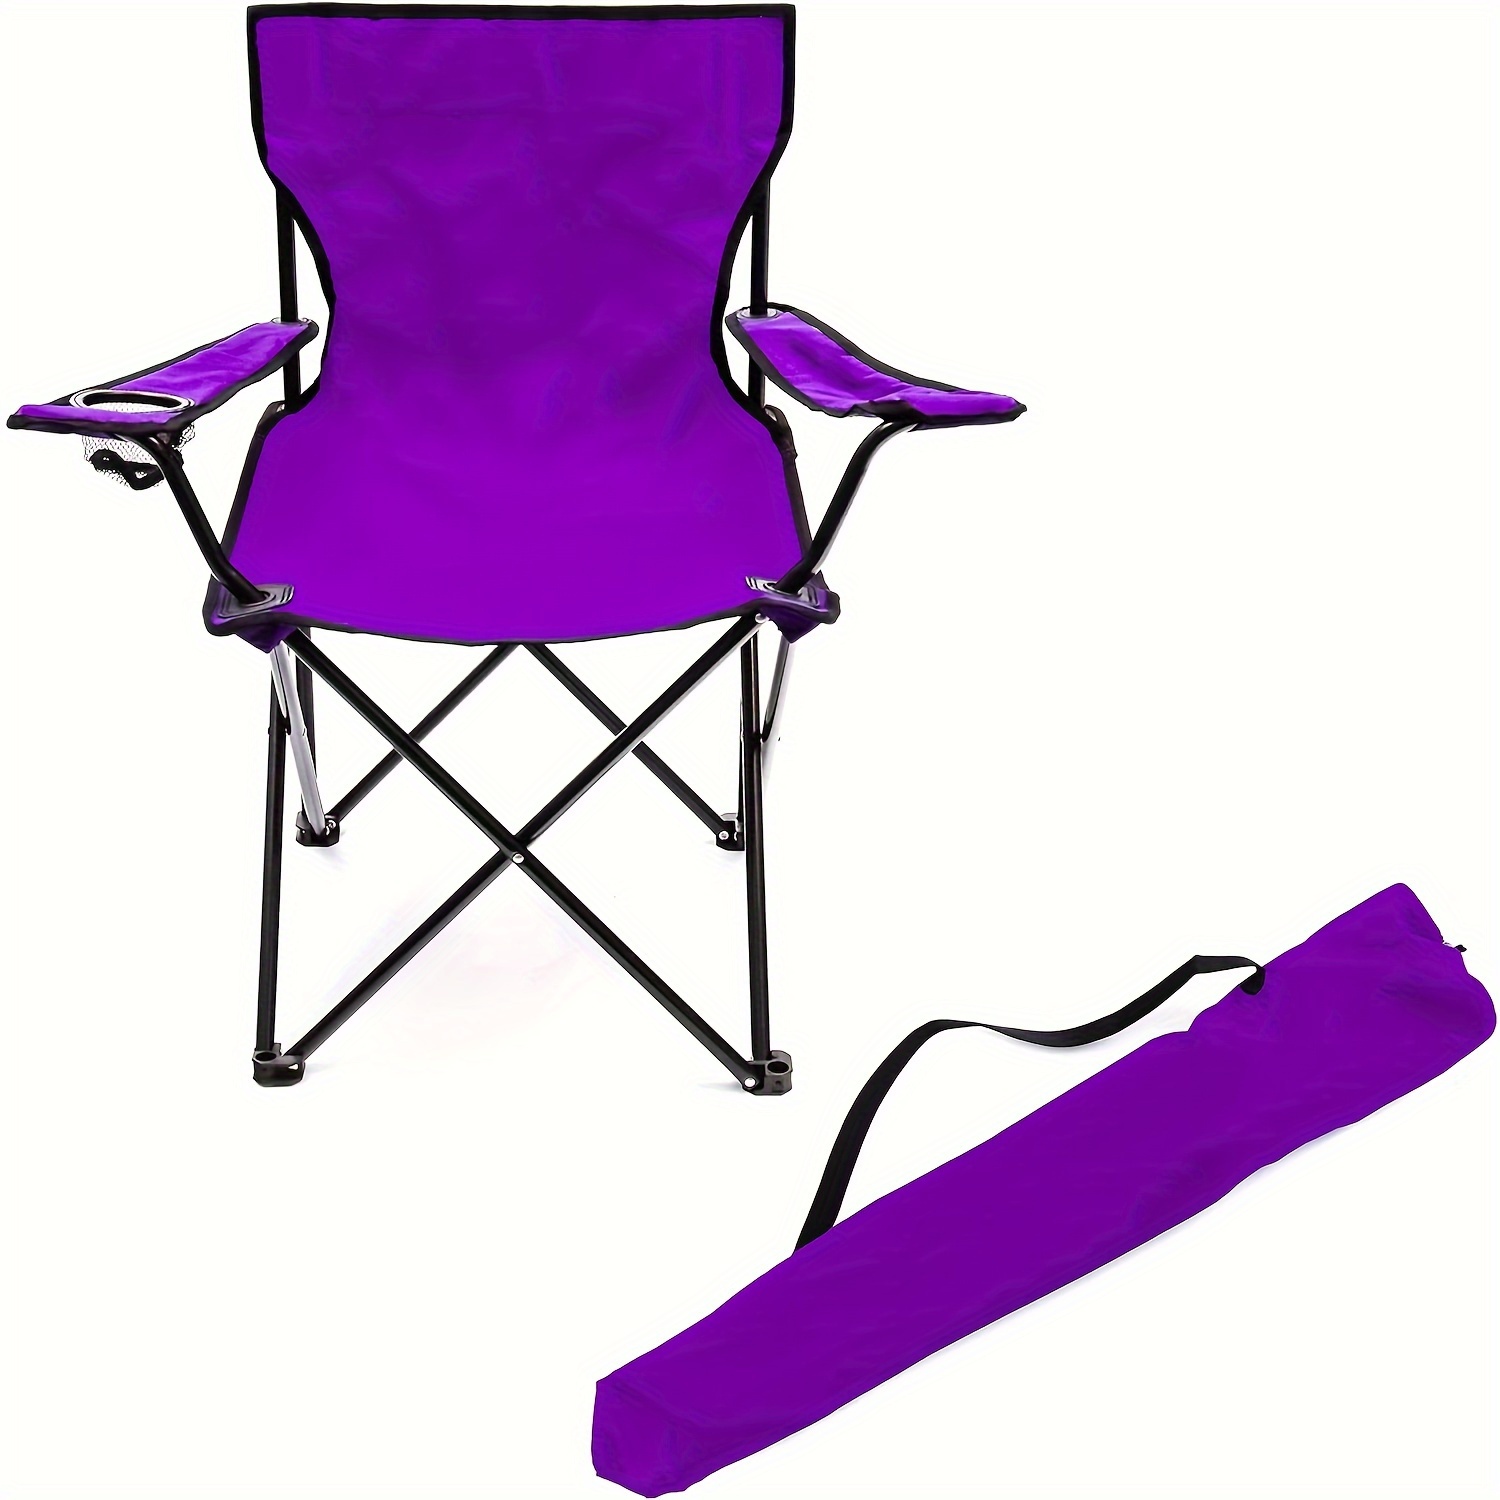 1pc Portable Folding Camping Chair With Carrying Bag Folding